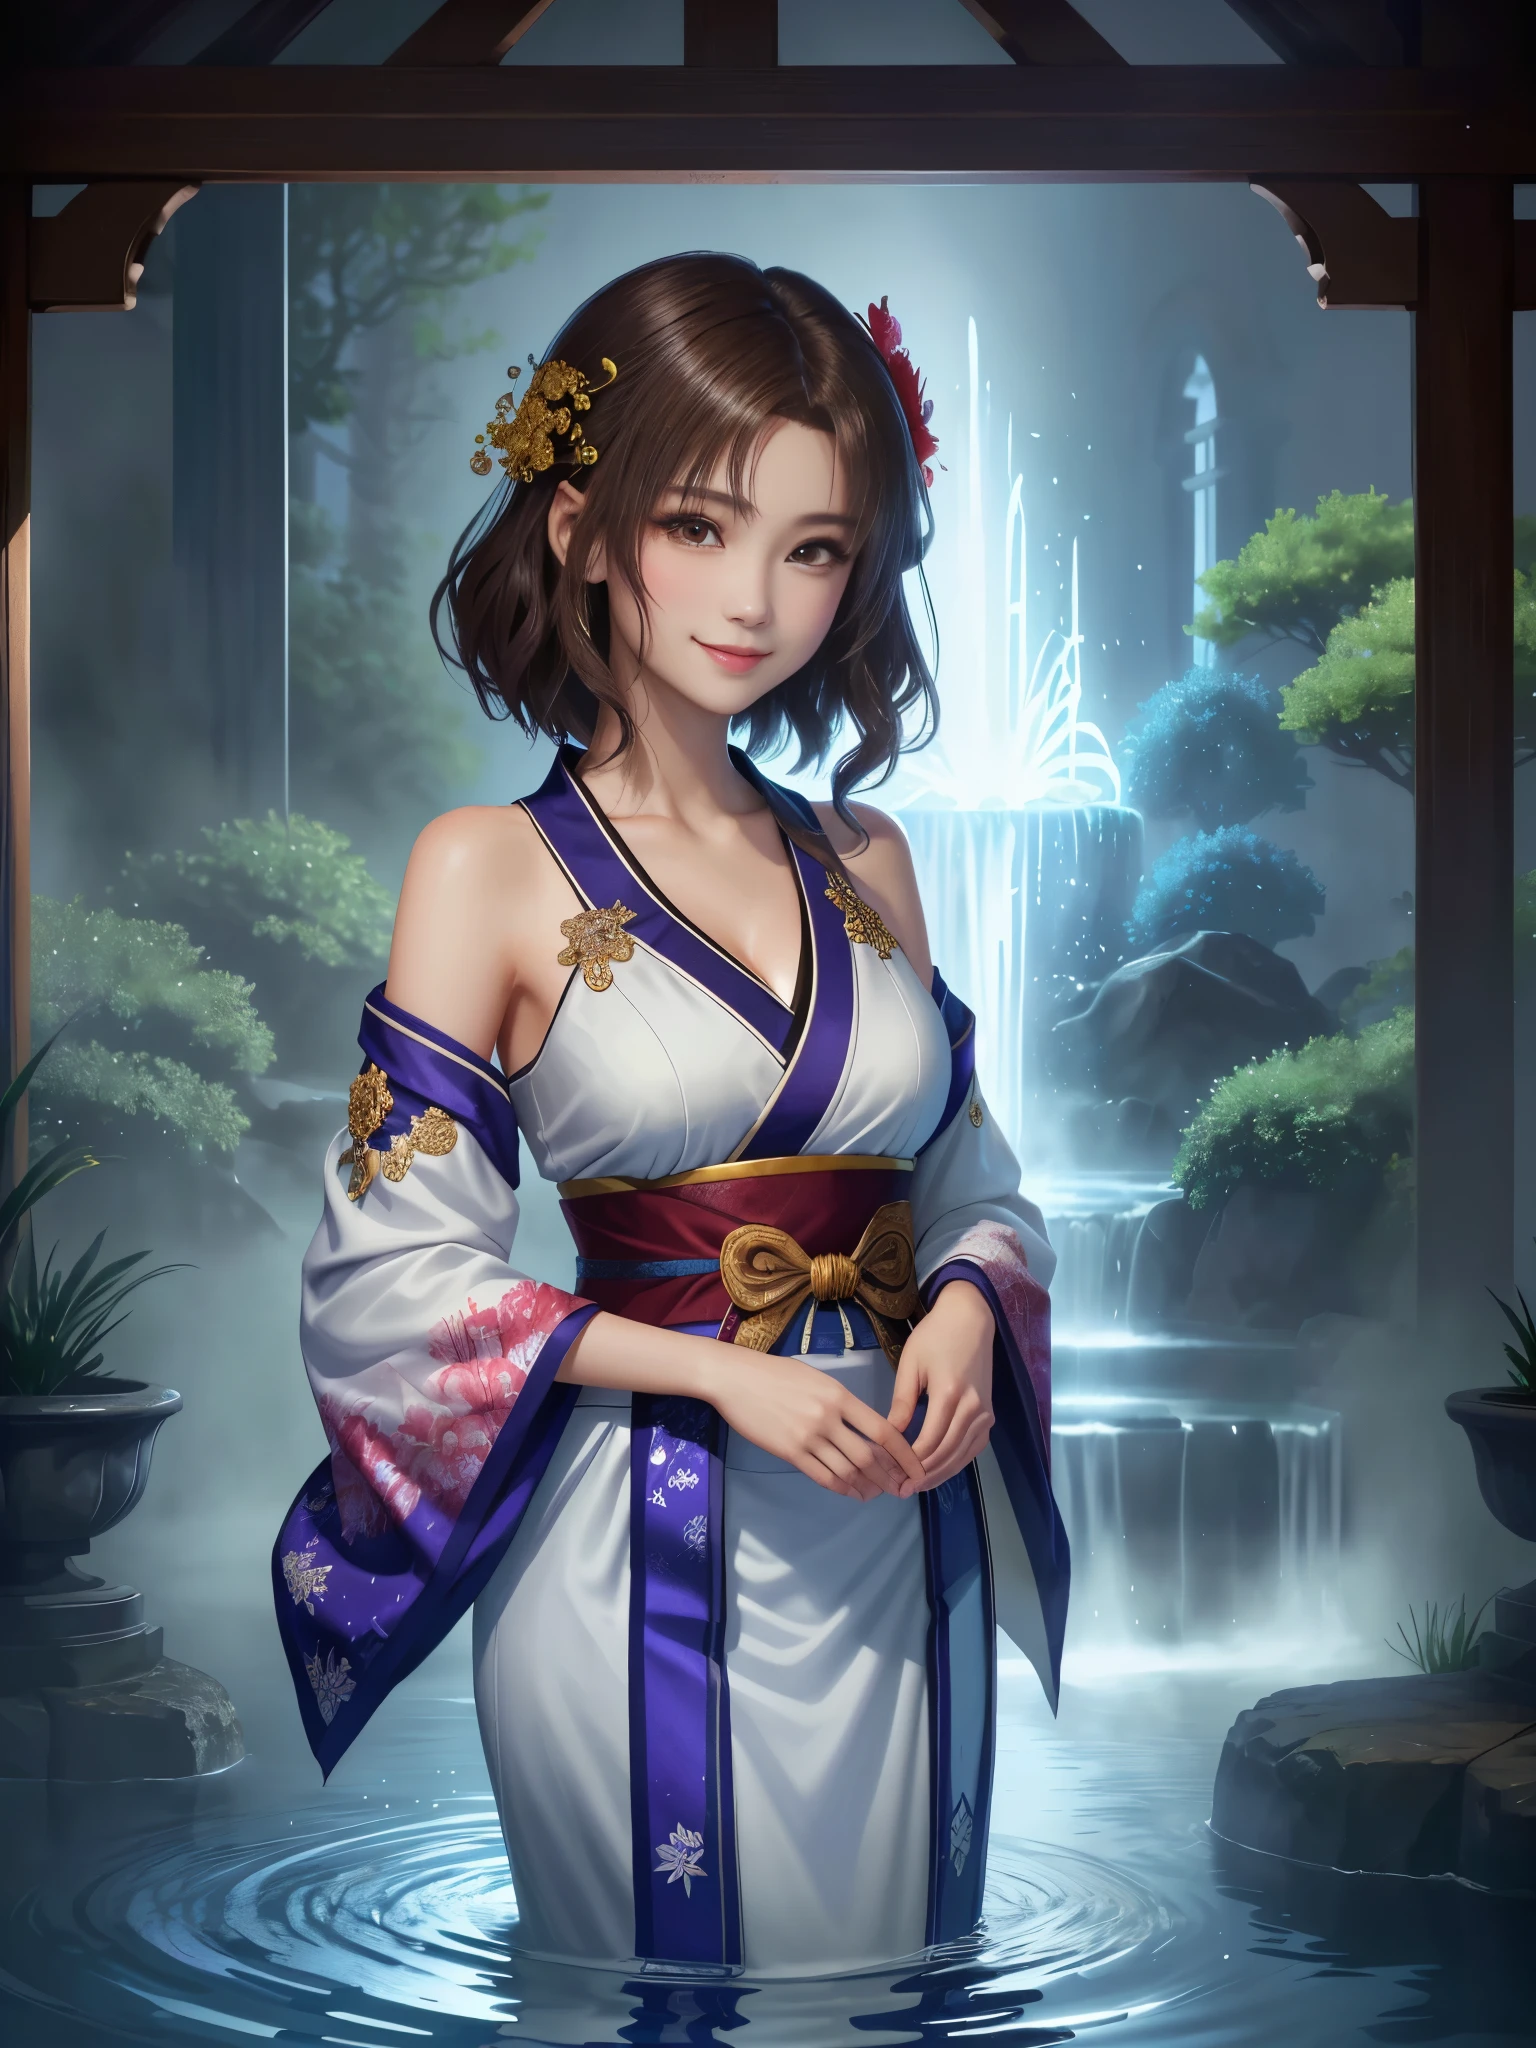 masterpiece , best quality,smile,smile,Small face,Exposed shoulders,golden kimono,A little cleavage exposure,Double Eyes,Beauty,Beauty,beautiful girl,Stand firmly on both feet,Charm,Adult,lure,Big eyes,Light brown hair,Mysterious World,Water God殿,,Water God,Water World,Mythical God,Light blue mysterious atmosphere,Water sources surround the area,Light blue Mysterious background,Gorgeously curled hair,Slim figure,Brown eyes,Faithfully reproduced contrast,Short Hair,Beautiful short hair,Berry Short,Short Hair,Just One,Precision quality,A faithful reproduction of the human eye,Light blue mysterious atmosphere,Light blue Mysterious background,Beautiful details, colorful, Subtle details, Delicate lips, Intricate details, Genuine, ultrargenuineista, Mature, Wide-open eyes, raposa de Beautiful digital art,Shrine maiden,Exquisite digital illustration, mizutsune,Pixiv Digital Art, Shining Light, High Contrast, Mysterious,Take center,View your viewers